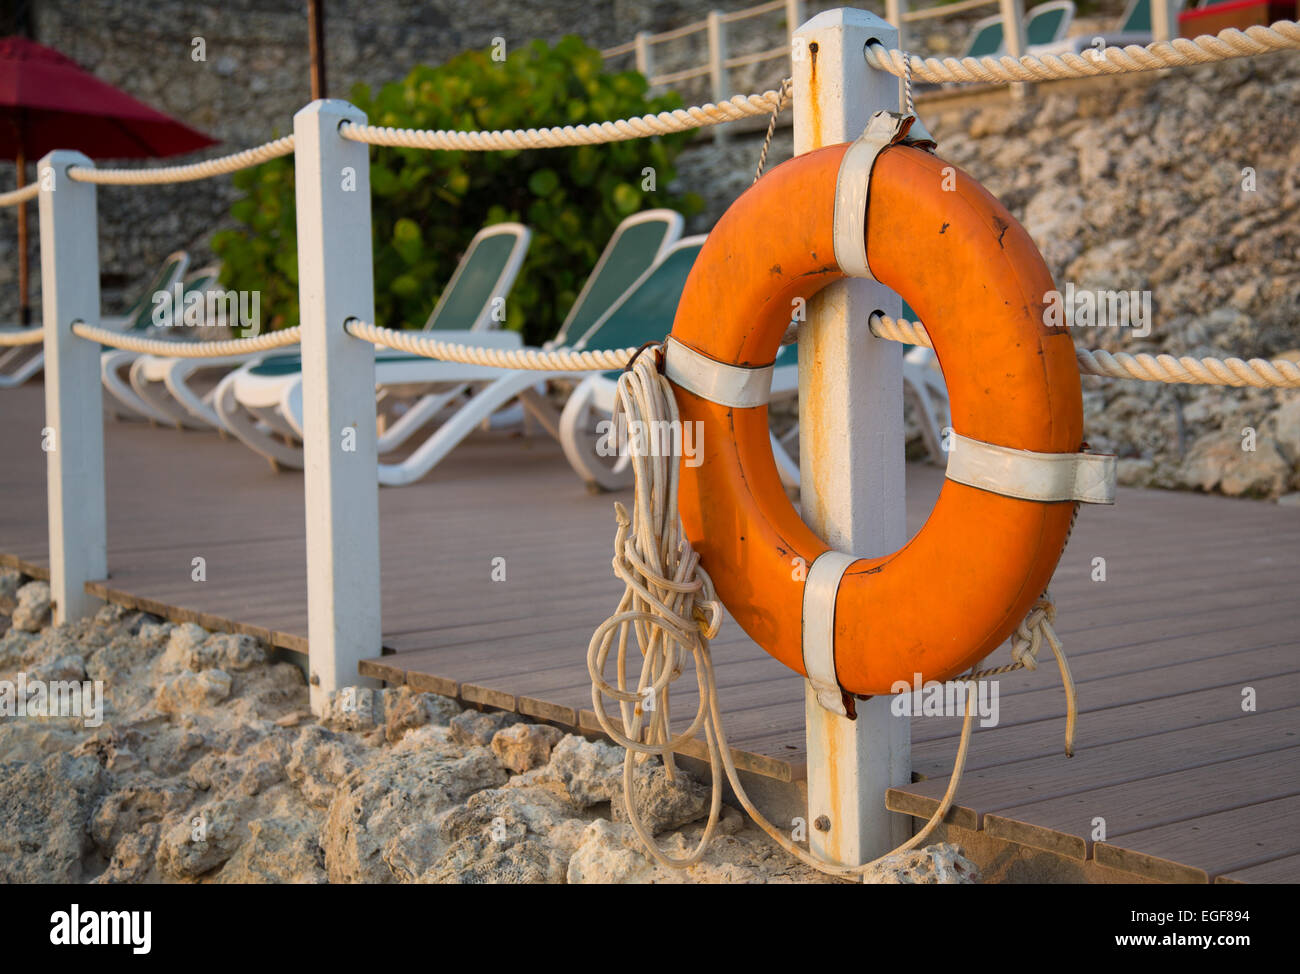 Life rings stand at the ready along the beach at a Caribbean resort. Stock Photo